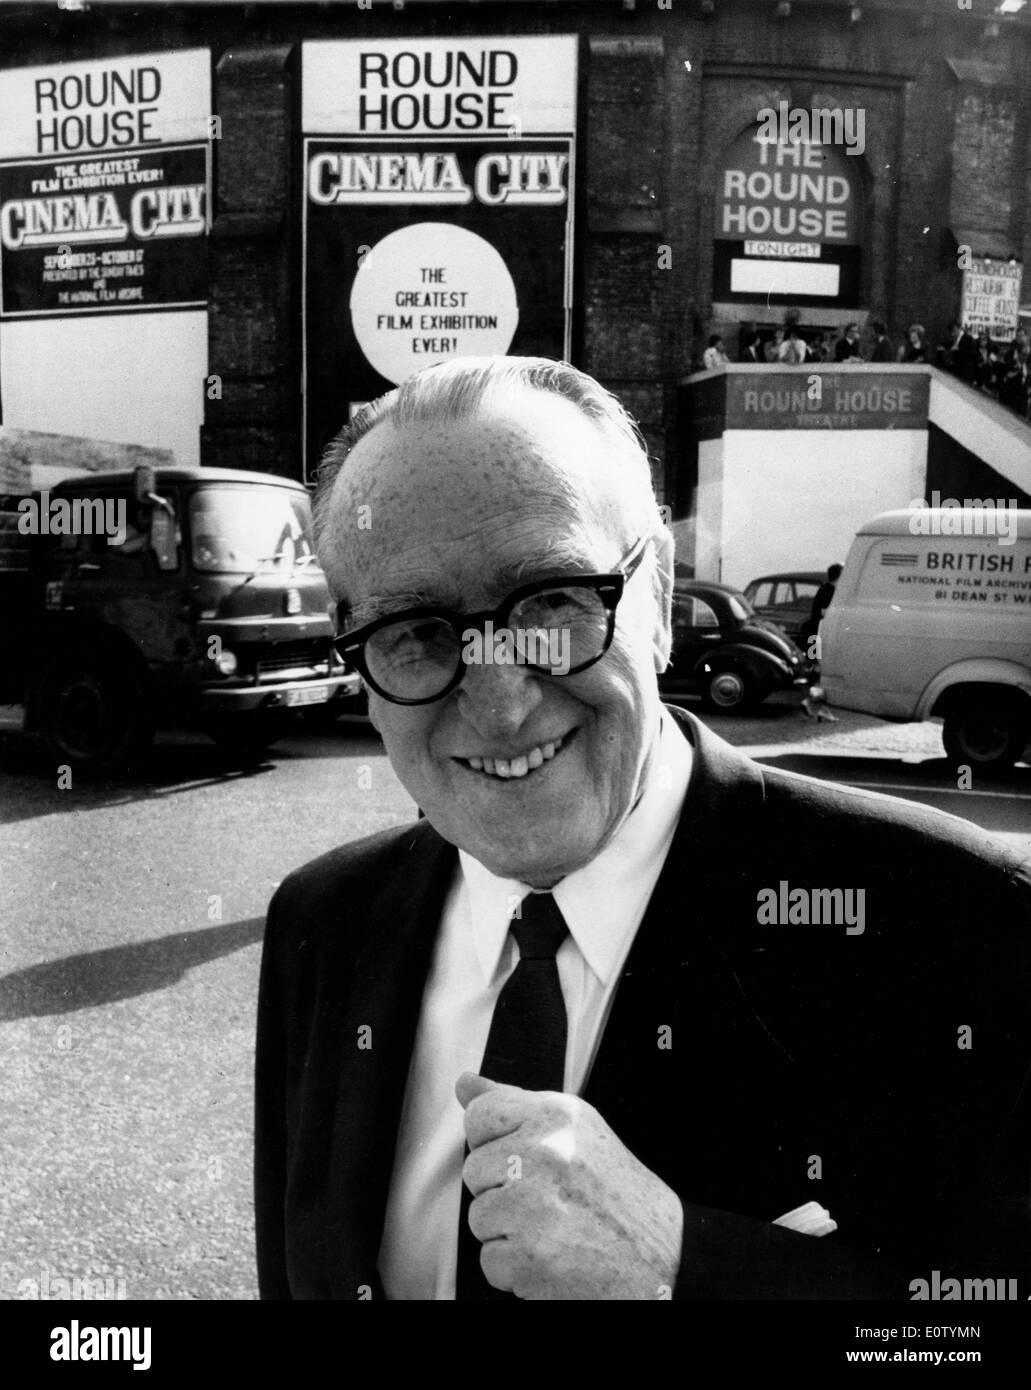 Actor Harold Lloyd in front of the Round House Cinema City Stock Photo